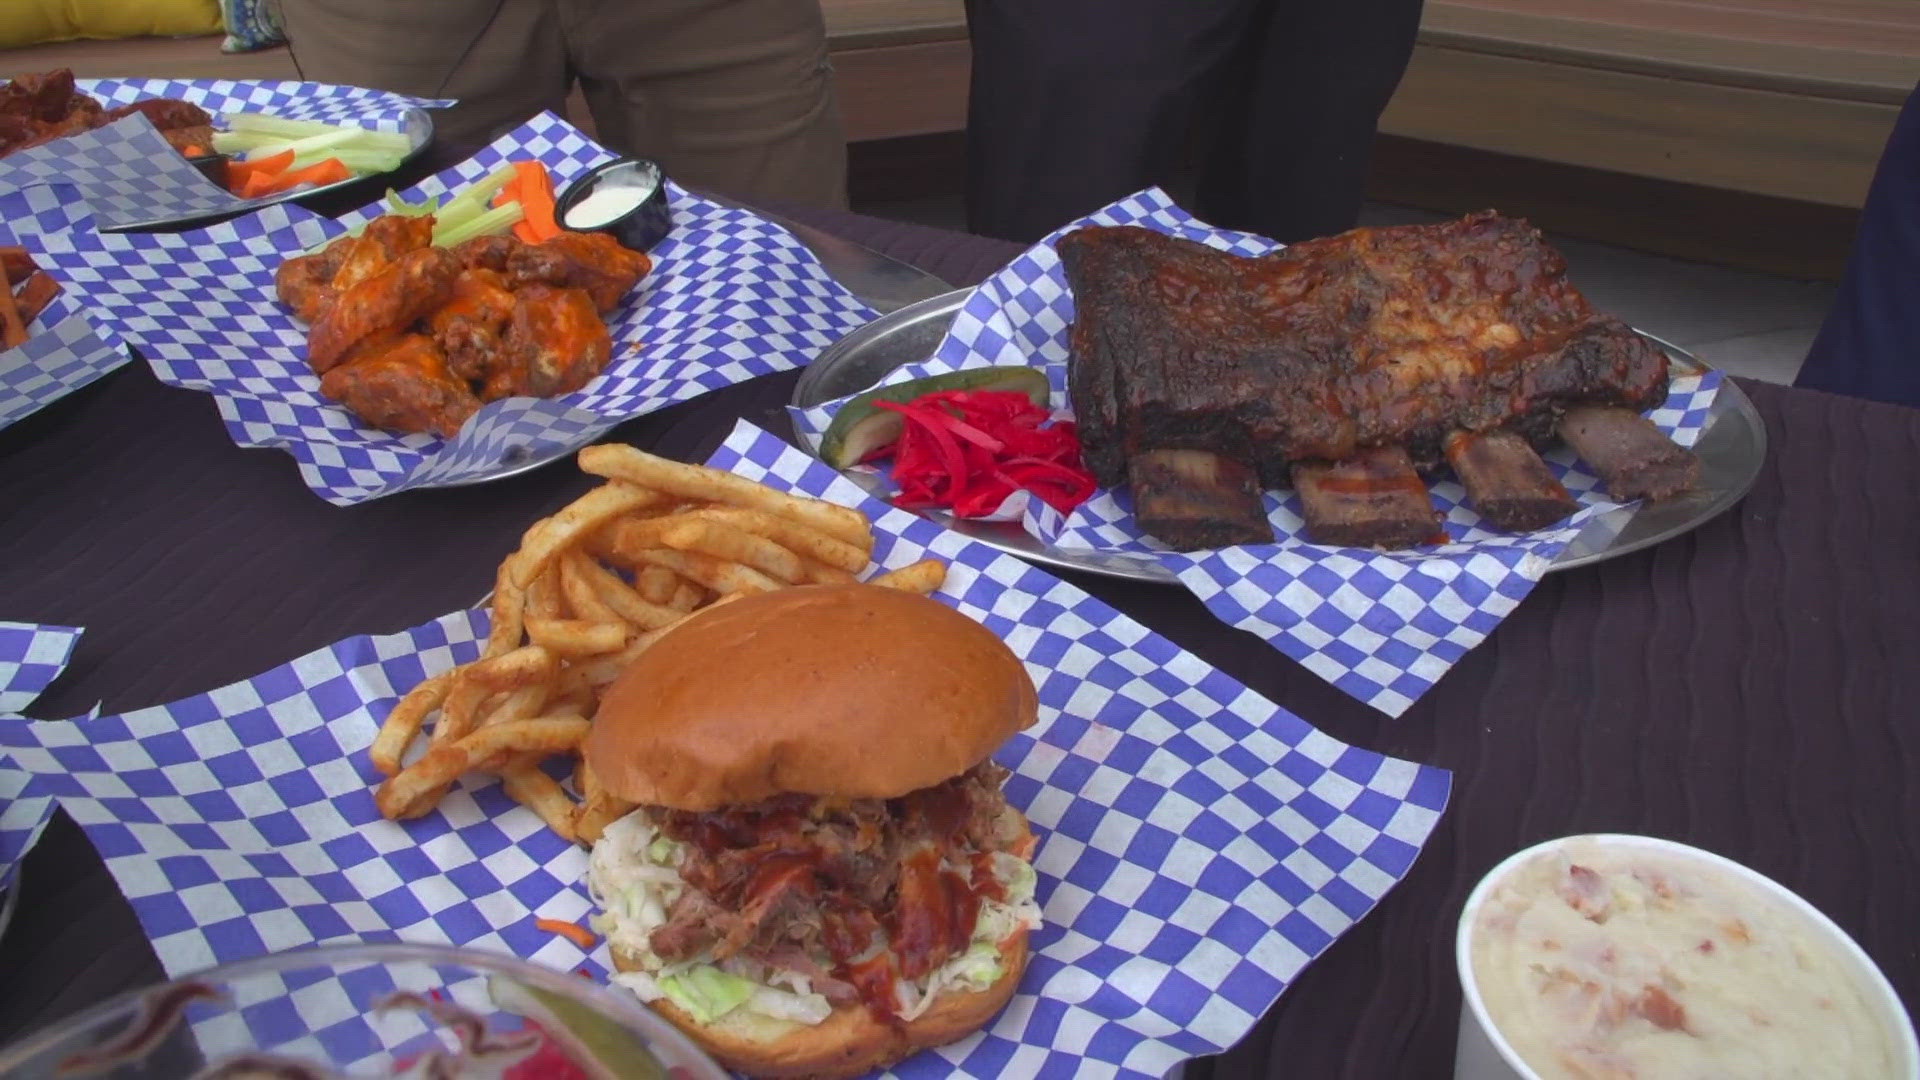 Today is National Barbecue Day and to celebrate we are joined by The Barn House BBQ, which recently opened in Lemon Grove.